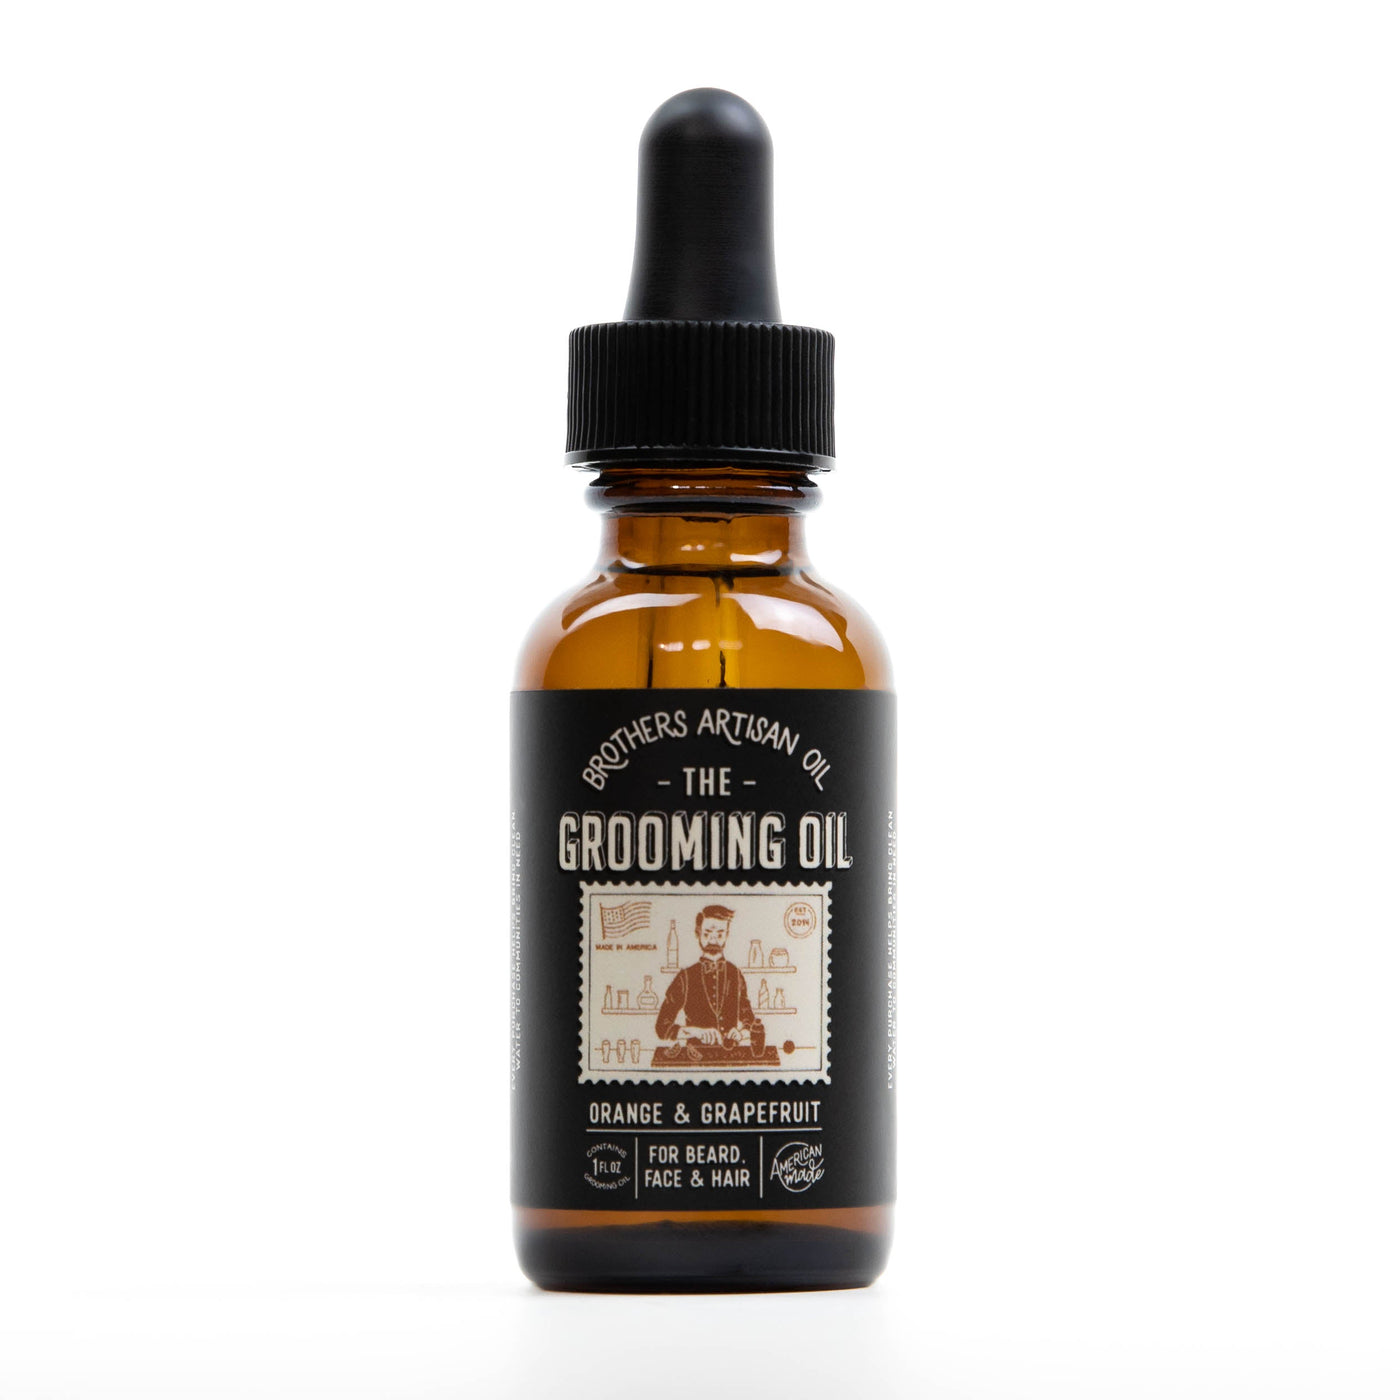 The Grooming Oil: Orange & Grapefruit by Brothers Artisan Oil